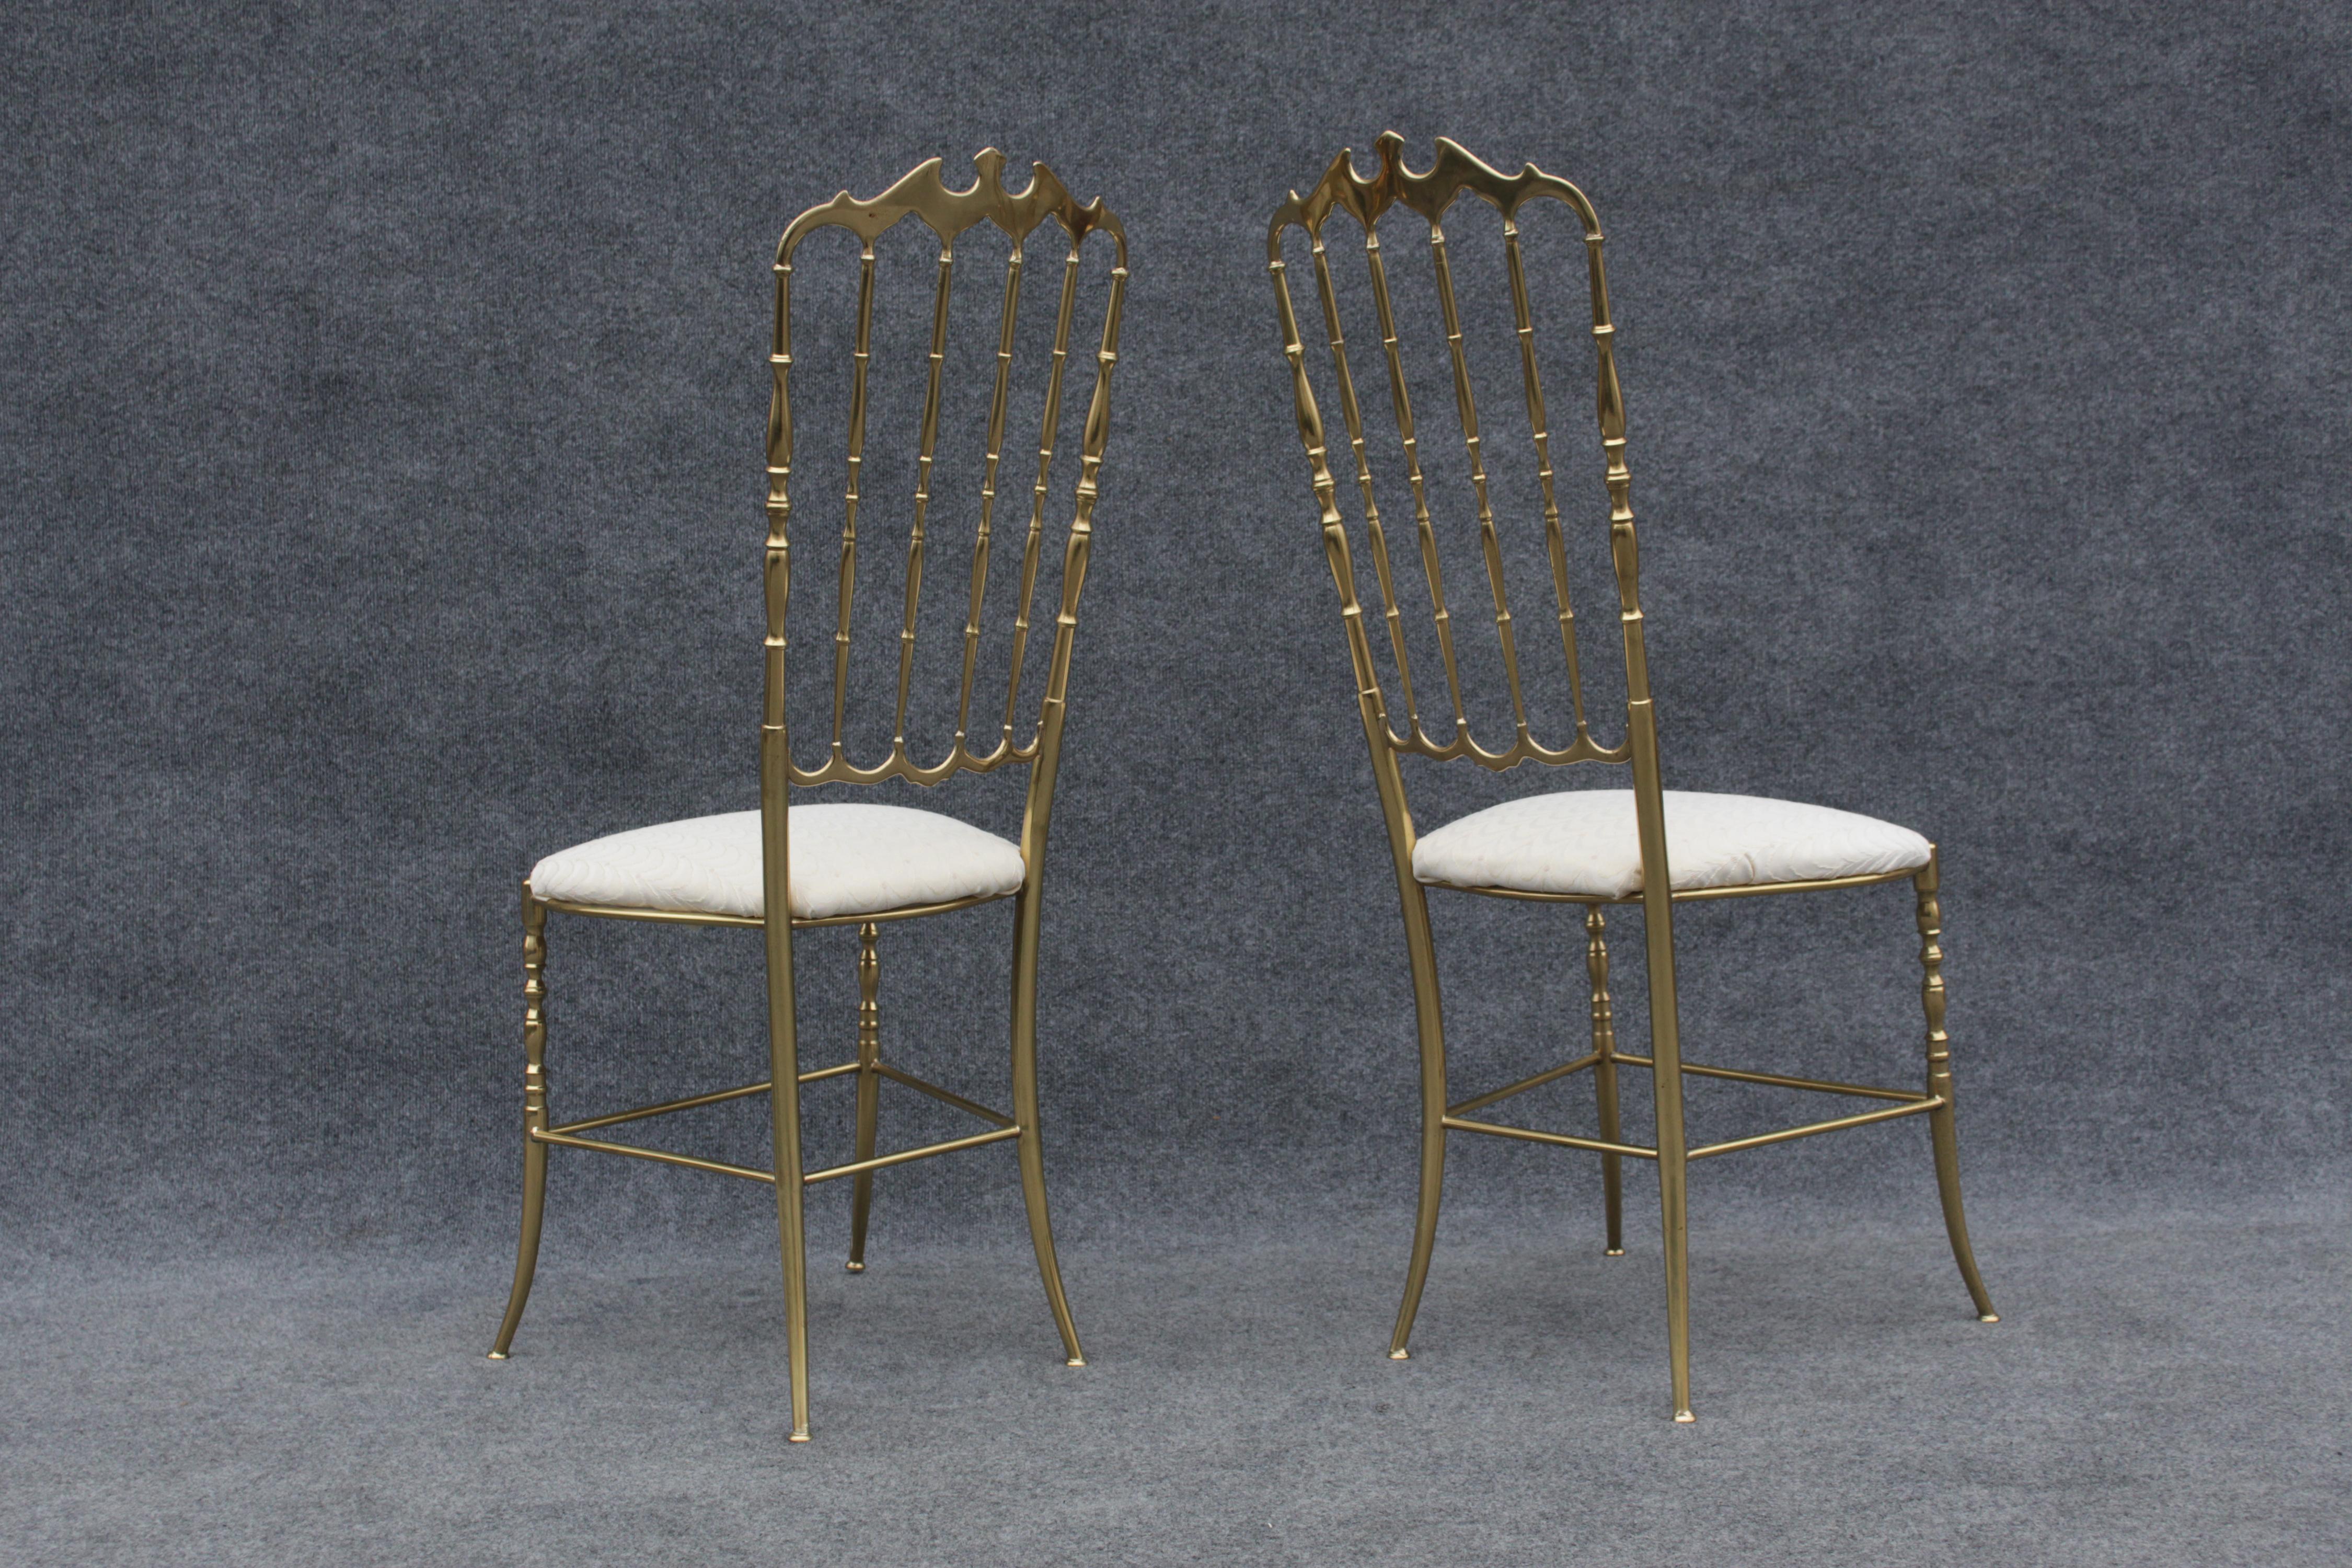 Pair of Solid Brass & White Upholstered Dining or Side Chairs by Chiavari Italy For Sale 4